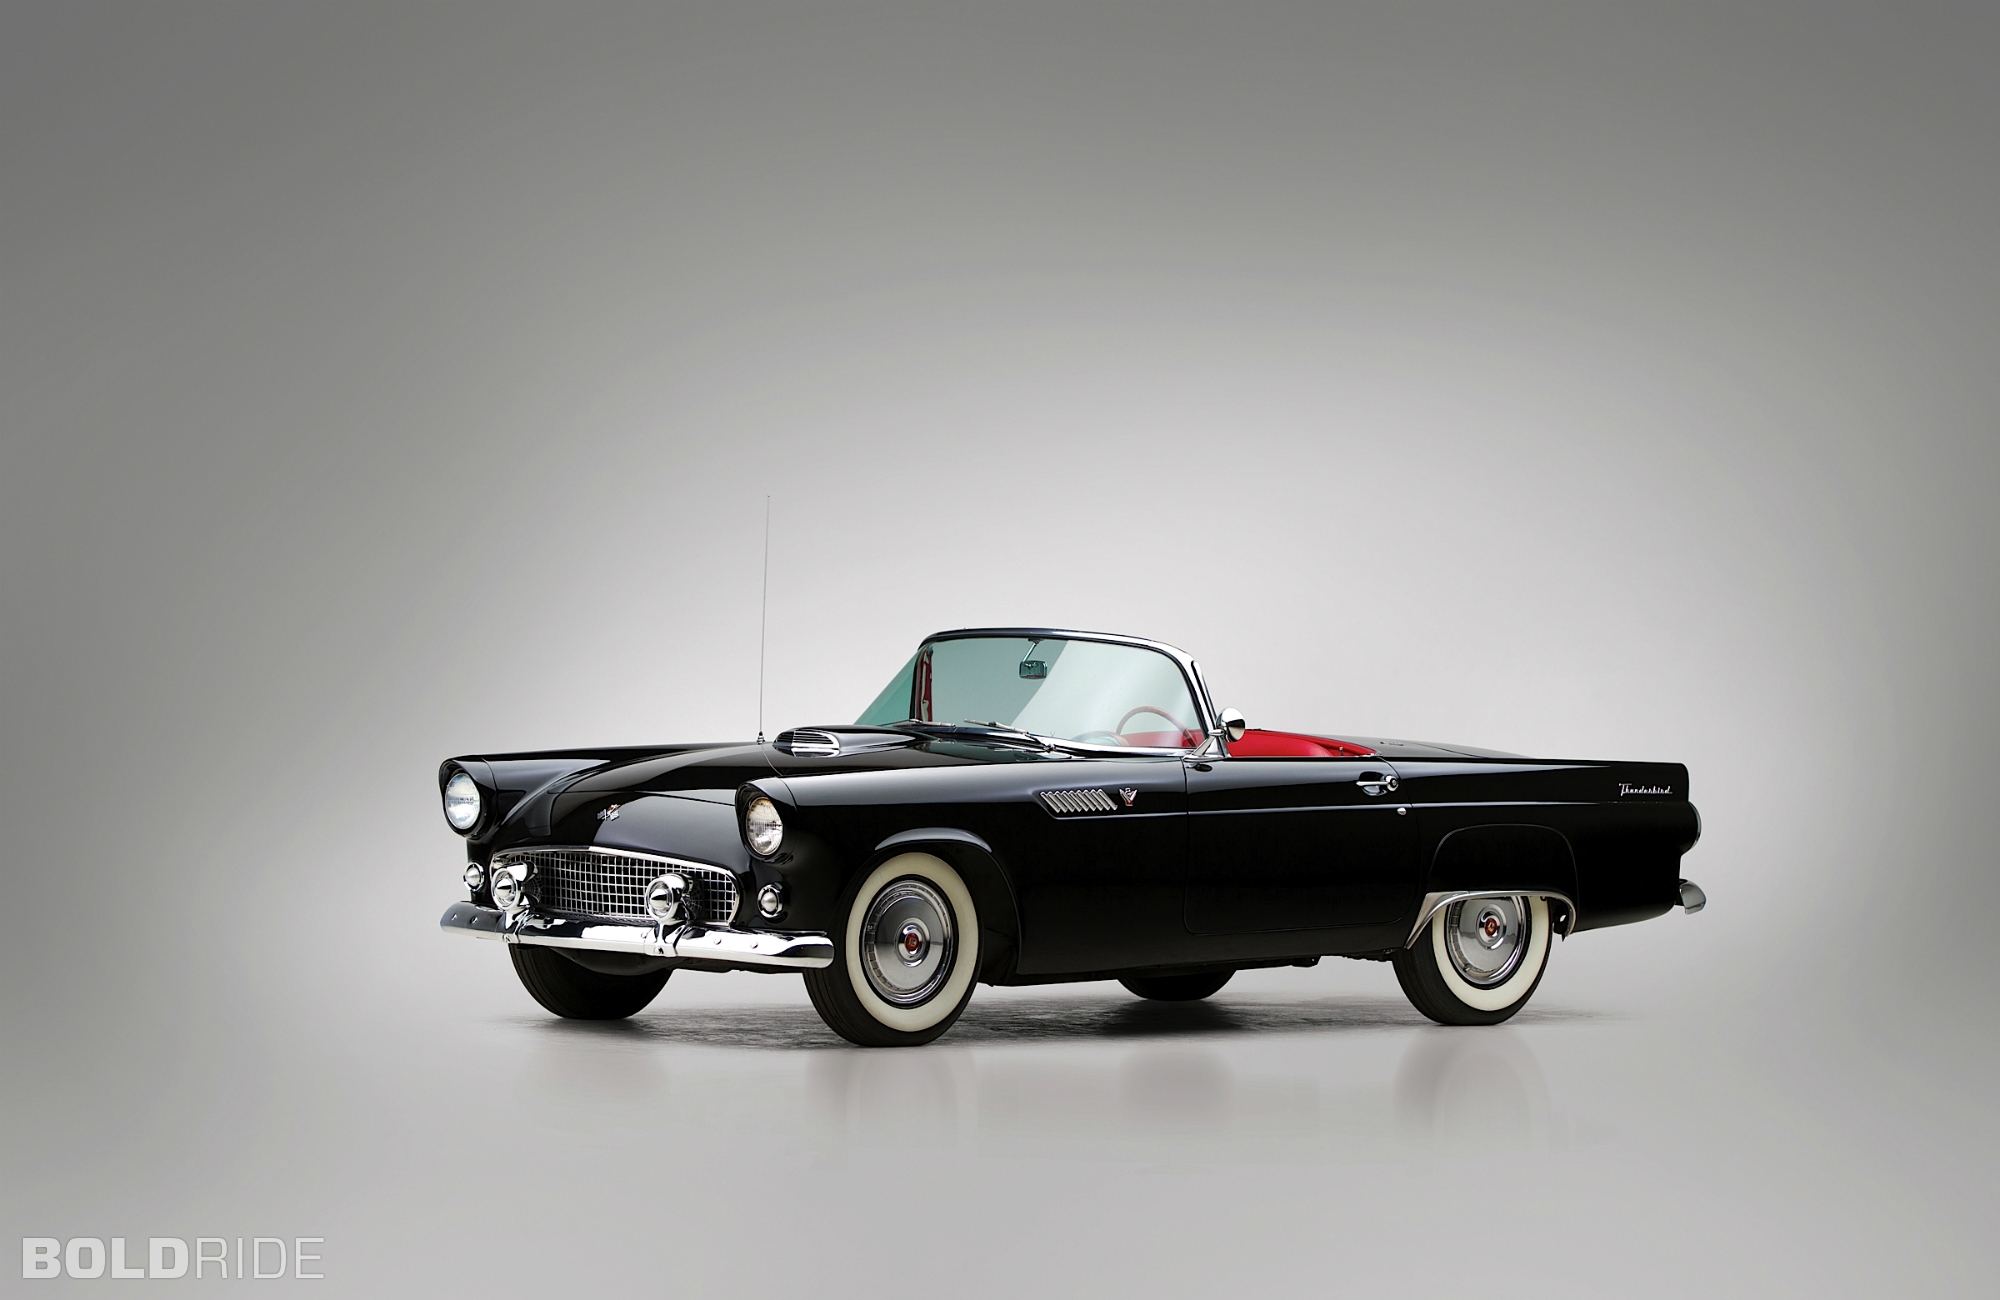 Ford Thunderbird Wallpapers Vehicles Hq Ford Thunderbird Pictures 4k Wallpapers 2019